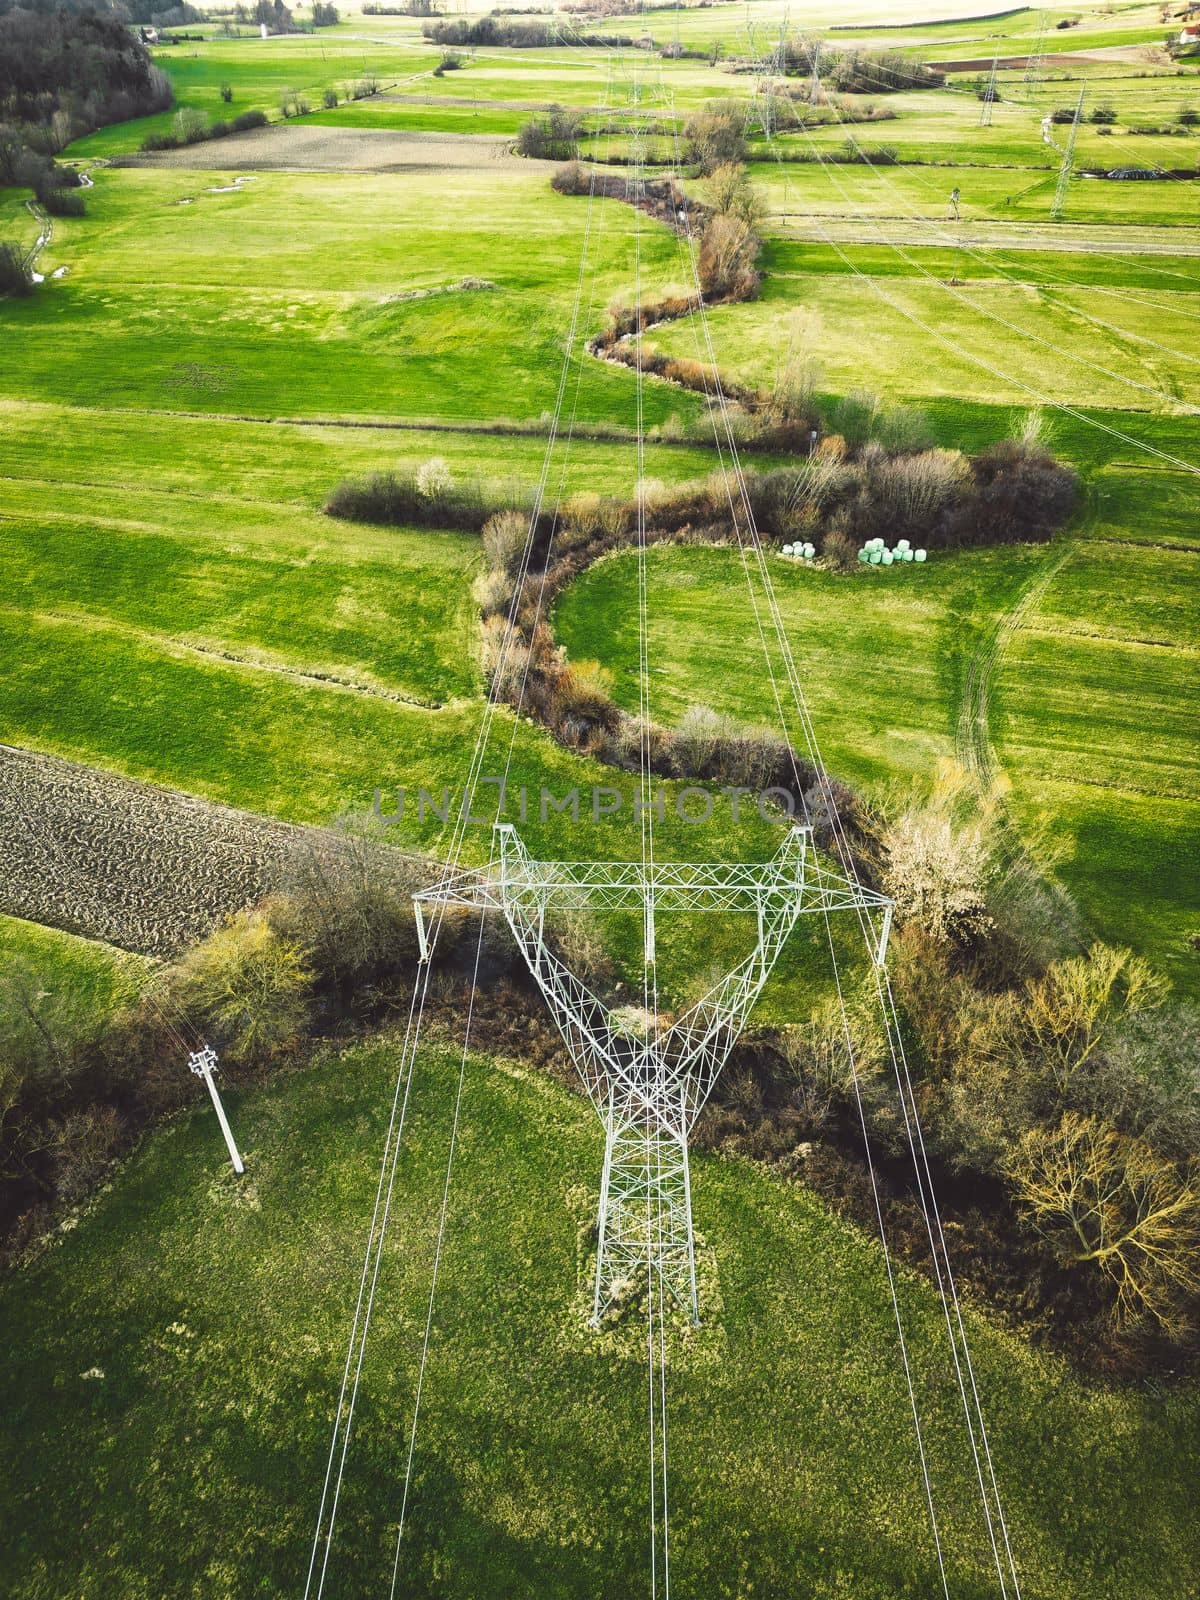 Electrical power substation in the country side of Slovenia. Fields and forests surrounding the power station in the suburbs. Aerial view.